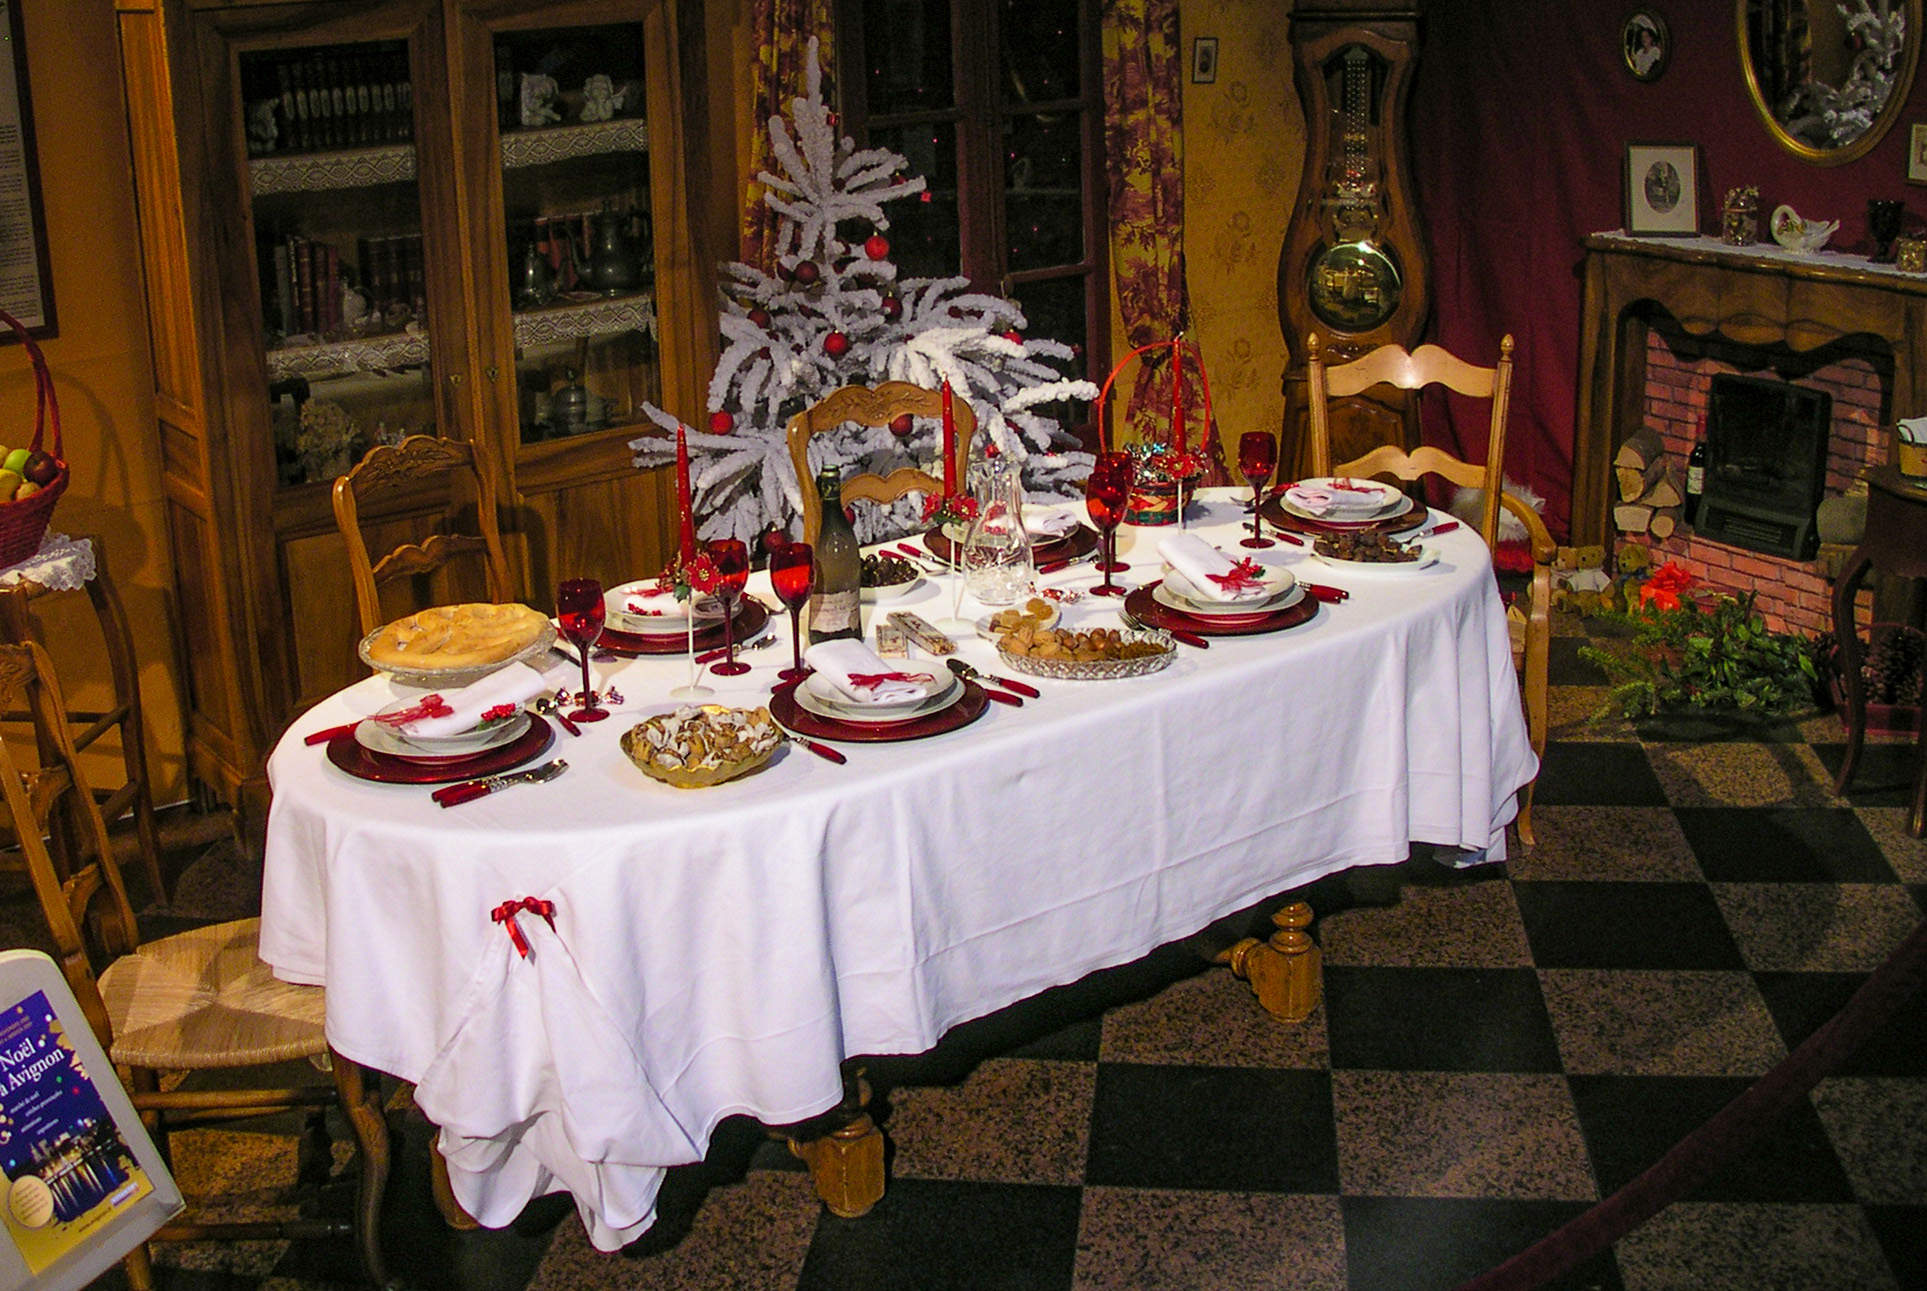 Table du Gros Souper © jean-louis zimmermann - licence [CC BY 2.0] from Wikimedia Commons